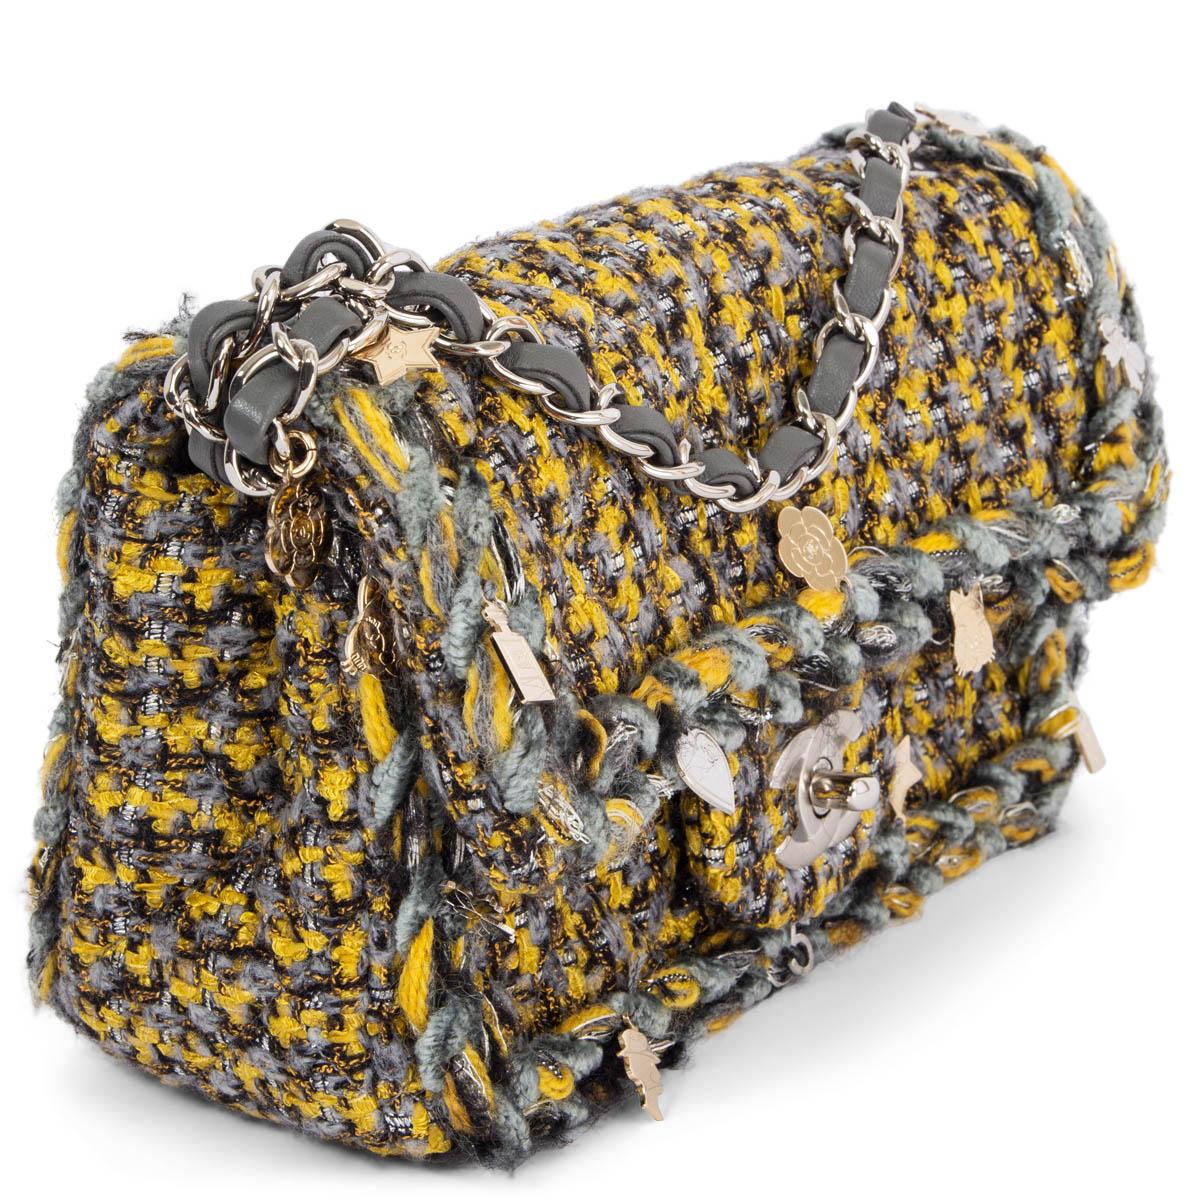 100% authentic Chanel 2017 Charms Tweed Small Flap shoulder bag in chartreuse, grey and black tweed fabric with a braided trim that is embellished with beige-gold and silver-tone charms. The bag features a silver-tone CC turn-lock and chain shoulder